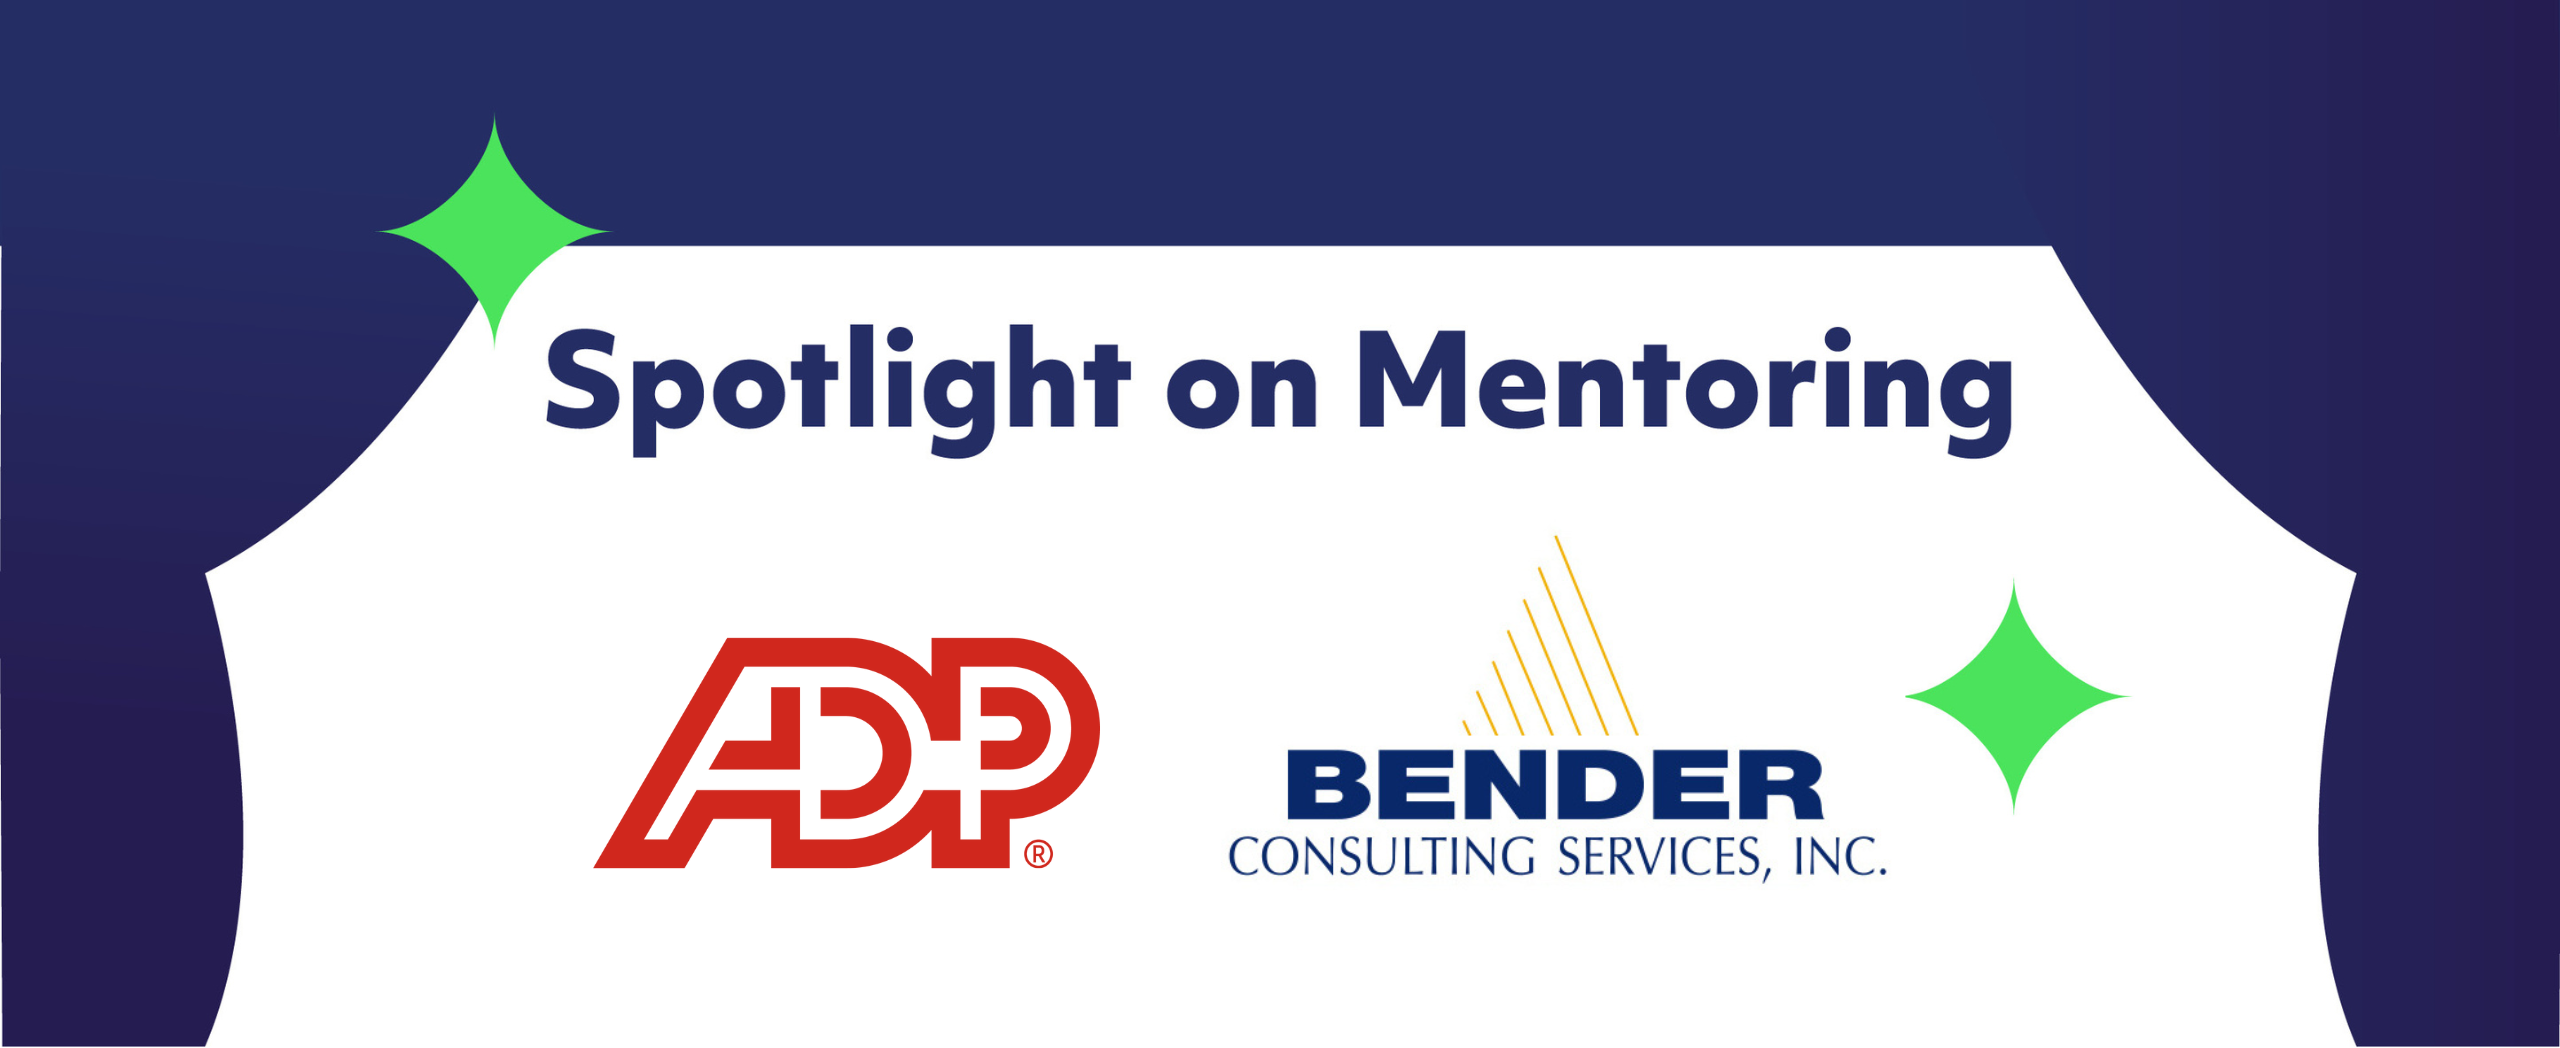 Spotlight on Mentoring with Bender Consulting Services & ADP